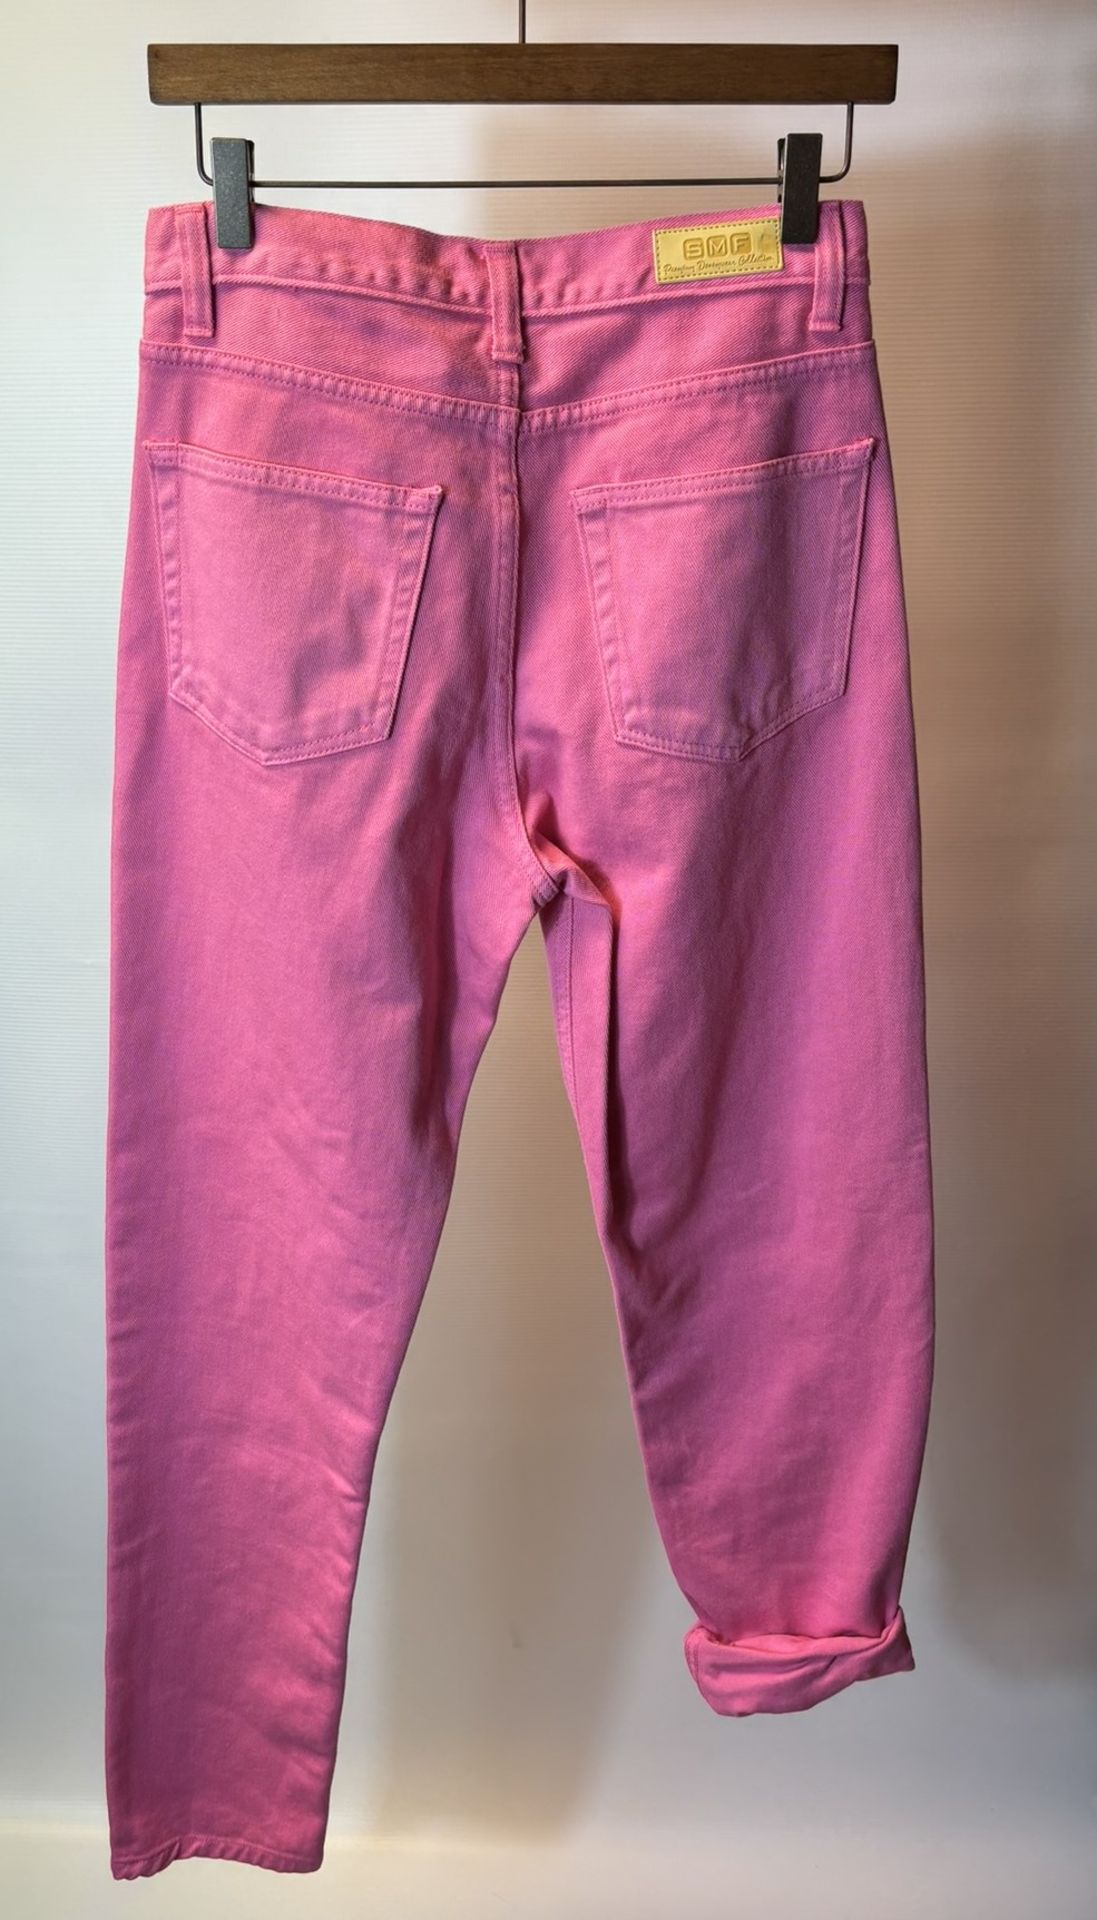 12 x Various Pairs Of Women's Trousers/Jeans As Seen In Photos - Bild 17 aus 36